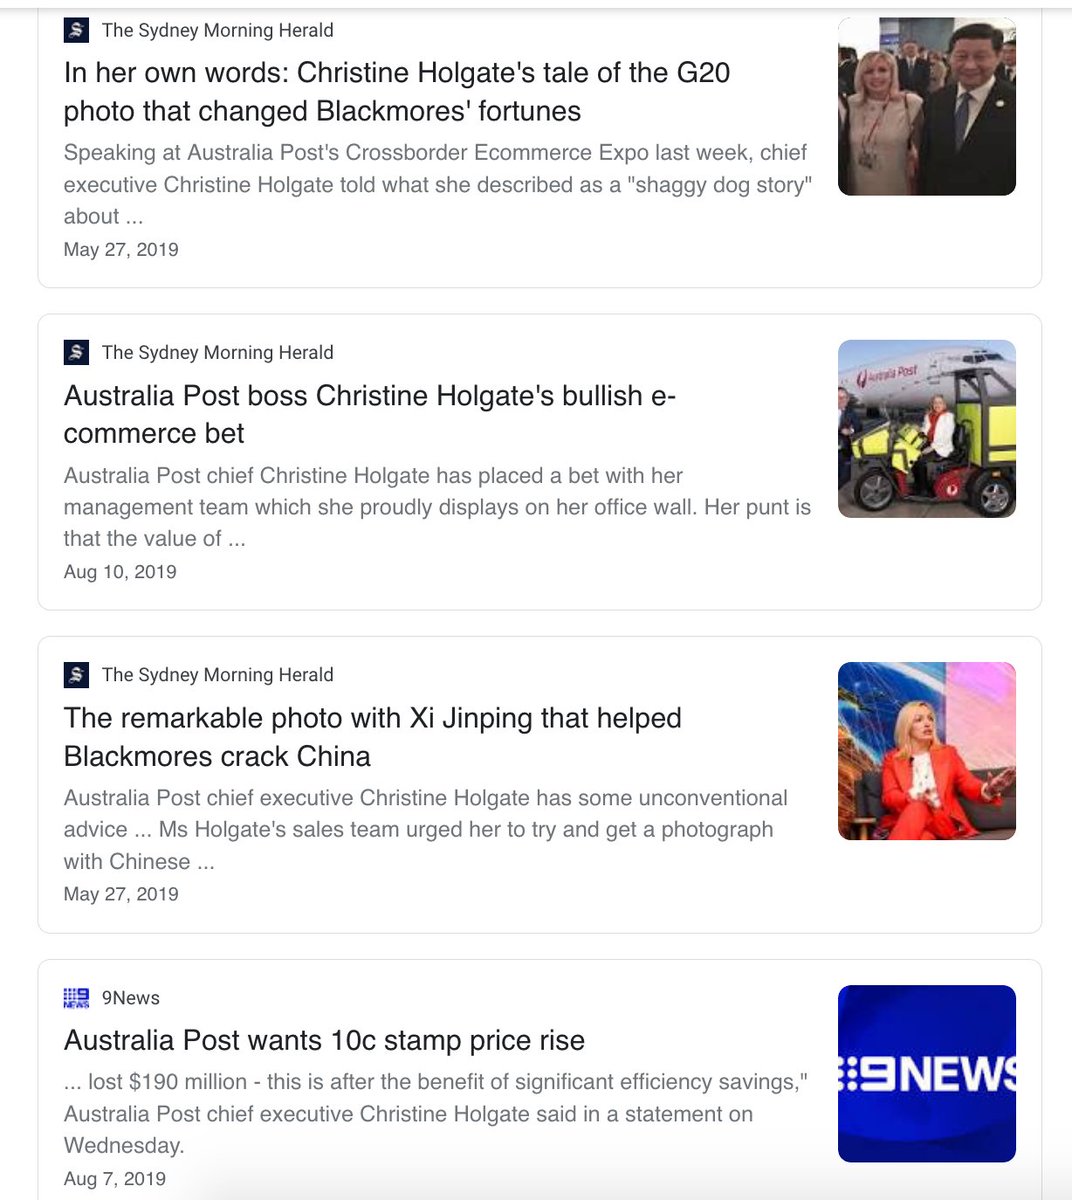 Media articles mentioning Ms Holgate personally from Nov 2017 to Feb 2020 were scattered & appeared to focus mainly on the operations of Aust Post.Many of these appear to be generated* from Aust Post itself trying to rationalise the changes made in services.(*corporate comms)